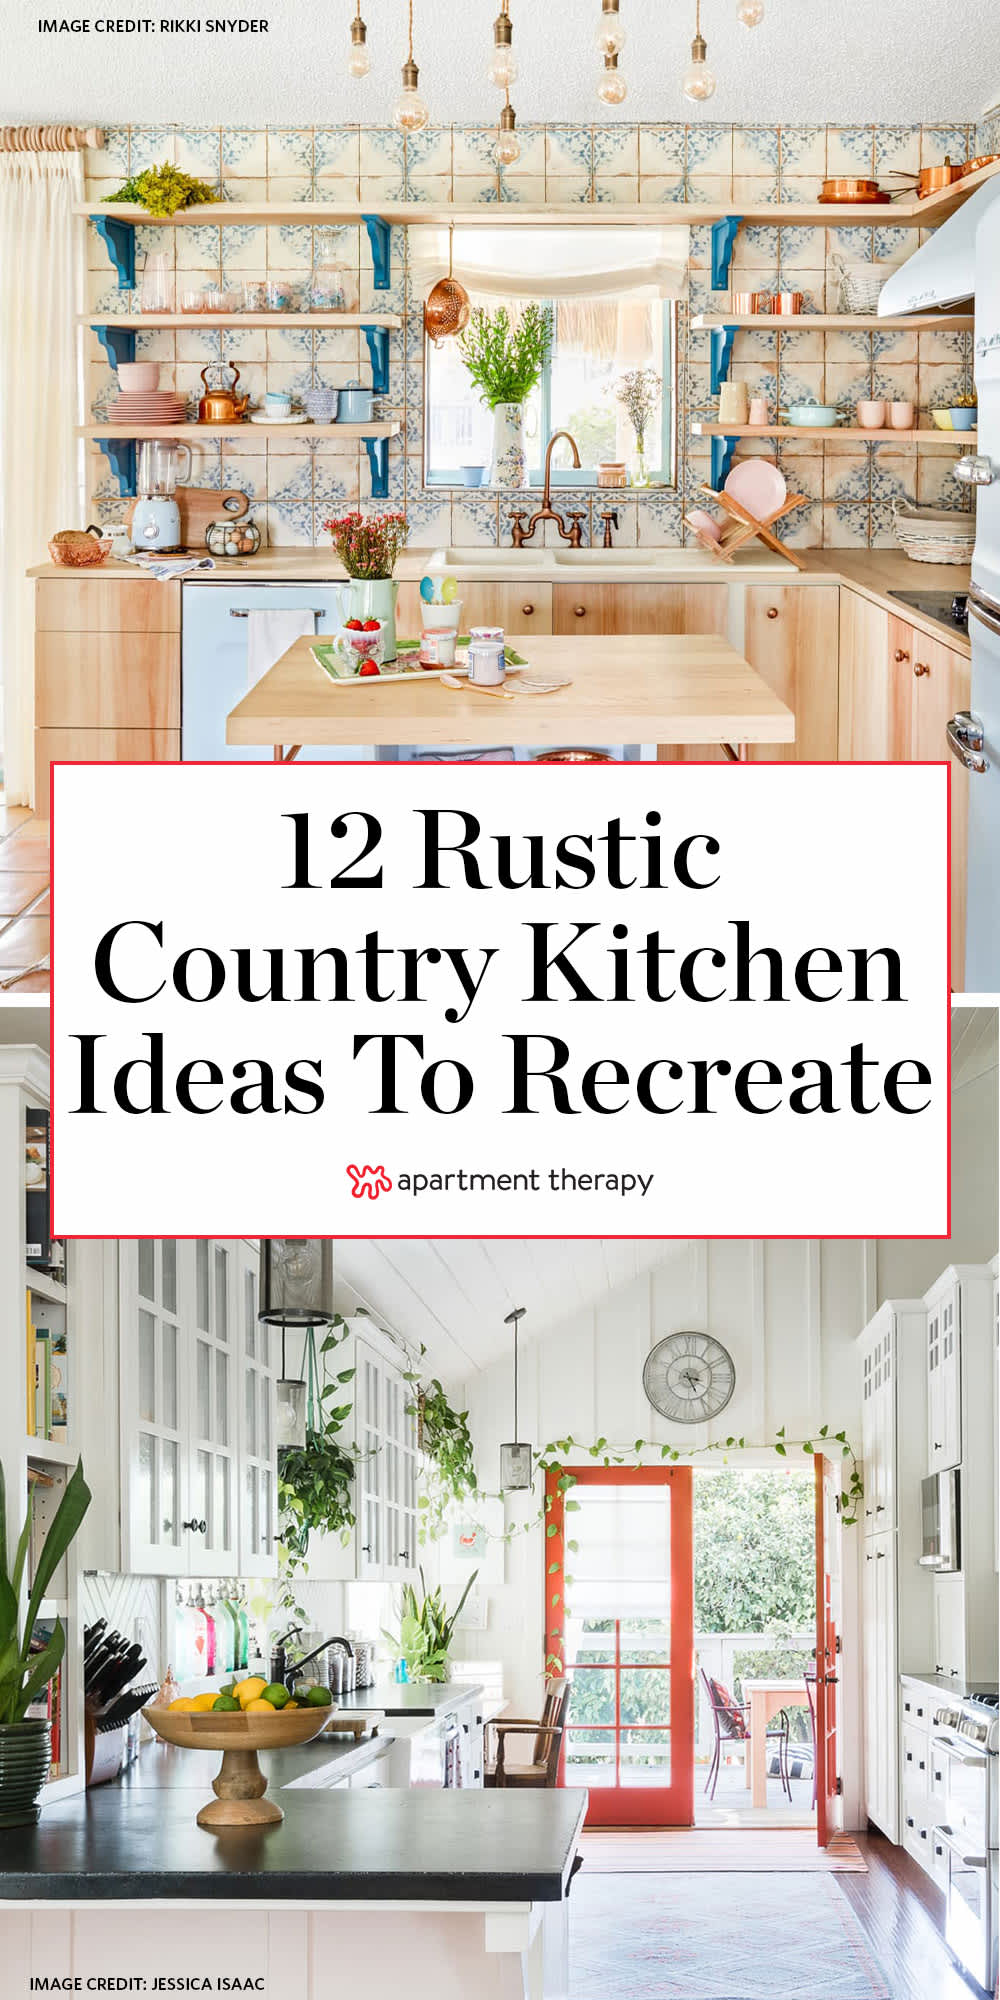 95 Country Style Kitchen Ideas Photos With Images Country